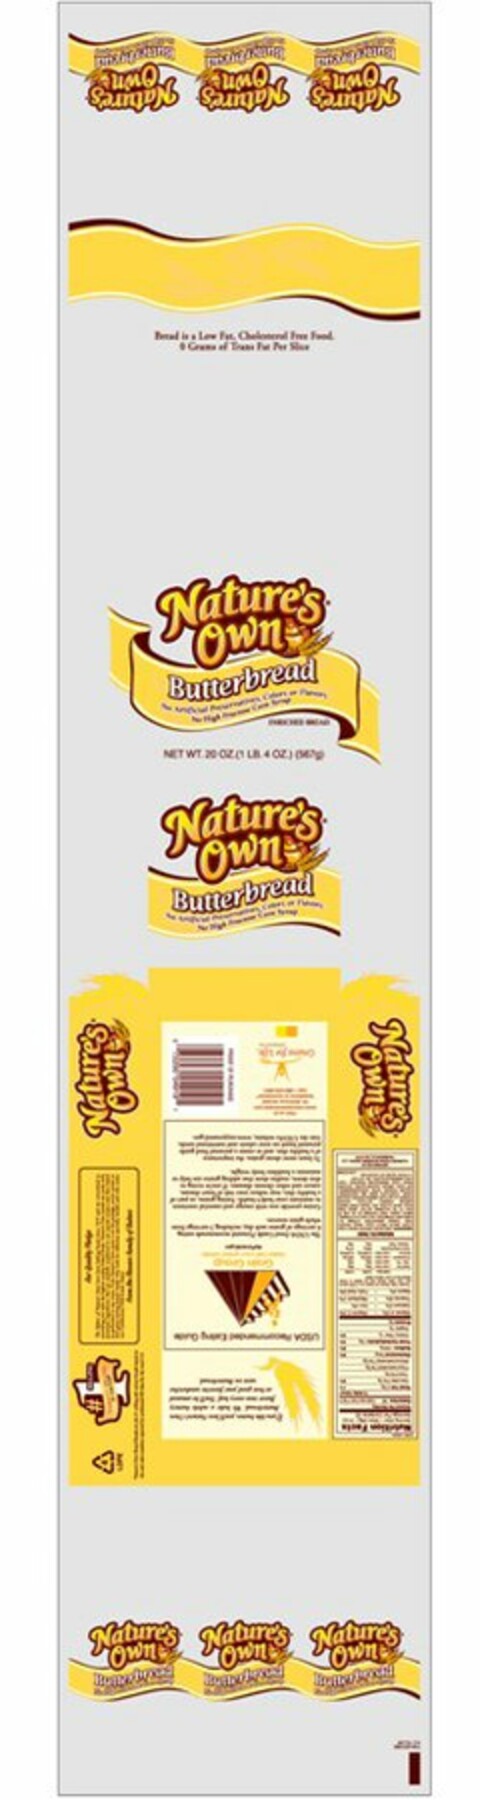 NATURE'S OWN BUTTERBREAD NO ARTIFICIAL PRESERVATIVES, COLORS OR FLAVORS NO HIGH FRUCTOSE CORN SYRUP ENRICHED BREAD Logo (USPTO, 26.09.2011)